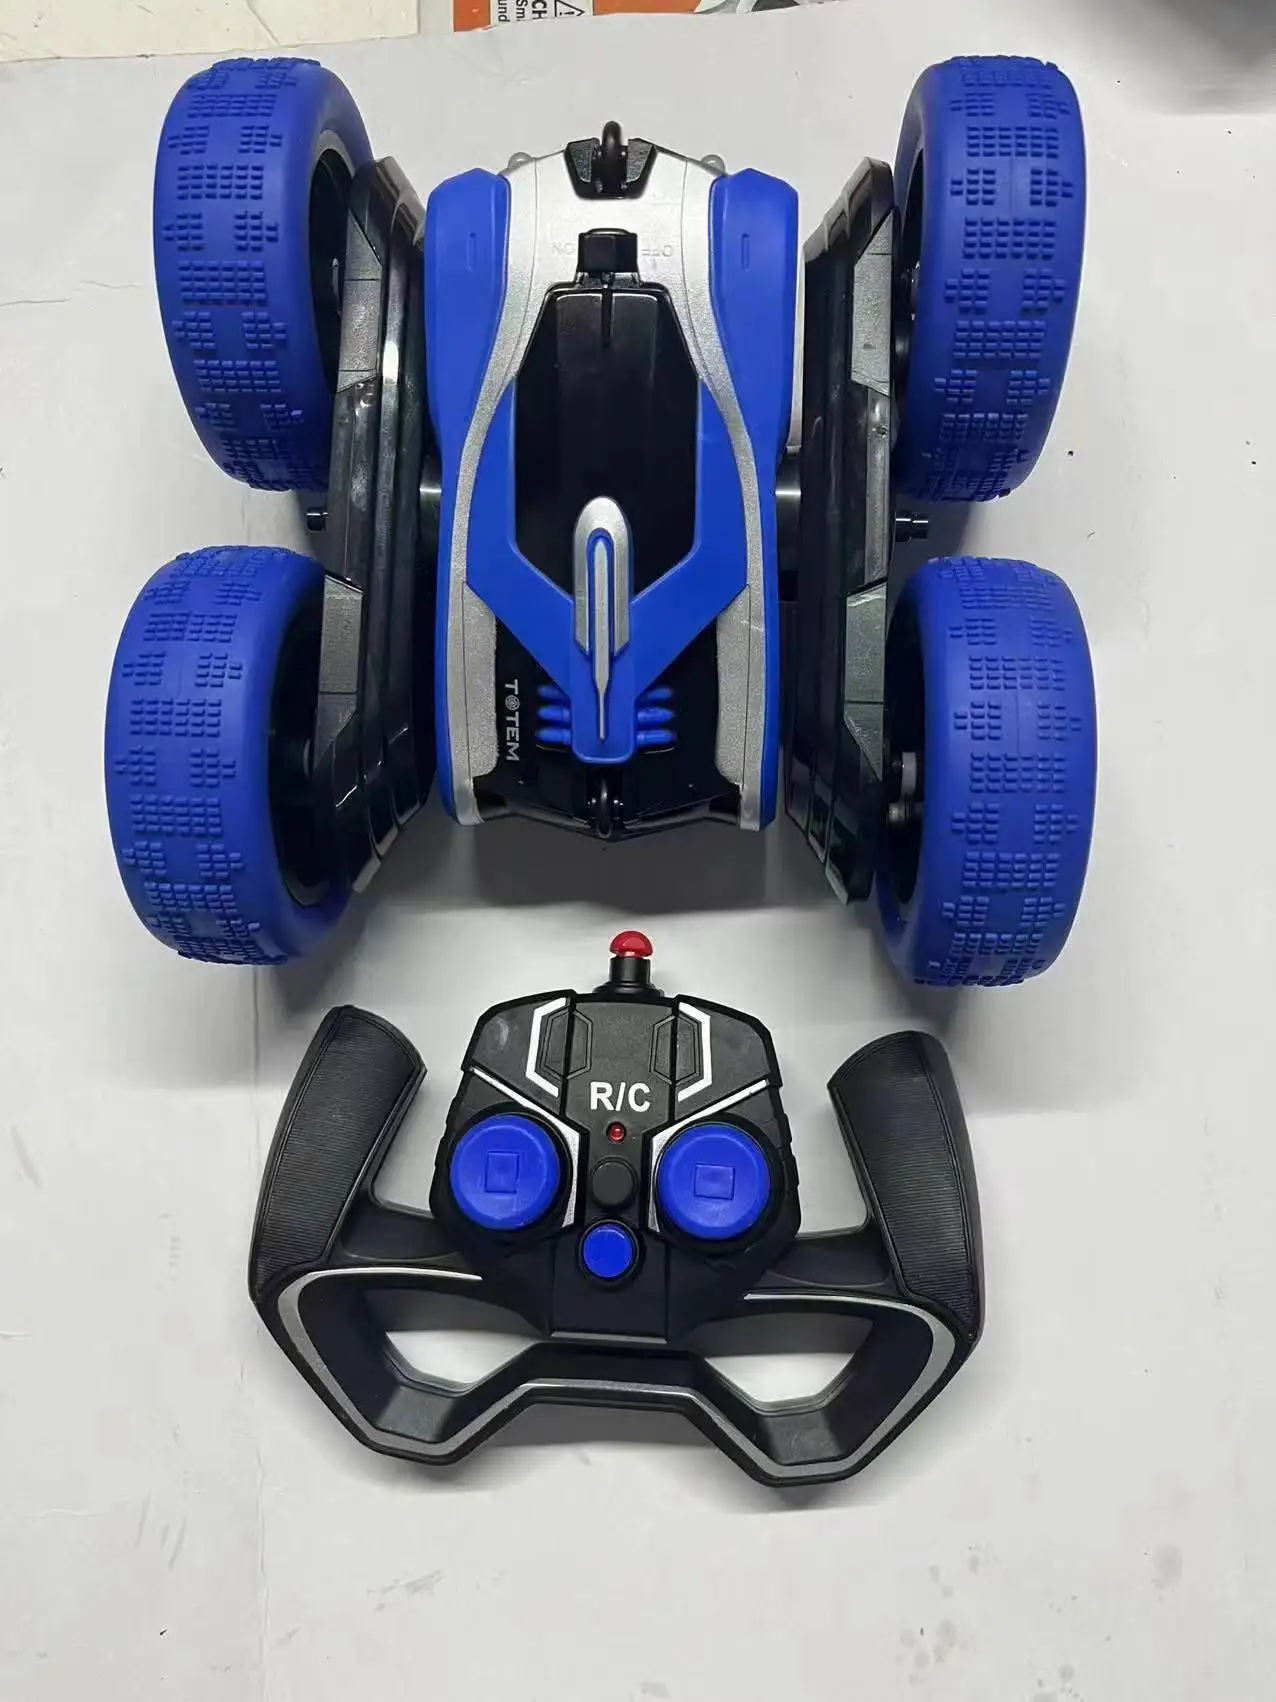 USSE Newly Remote Control Car, RC Cars Stunt Toy Double Sided Rotating RC Car with Headlights